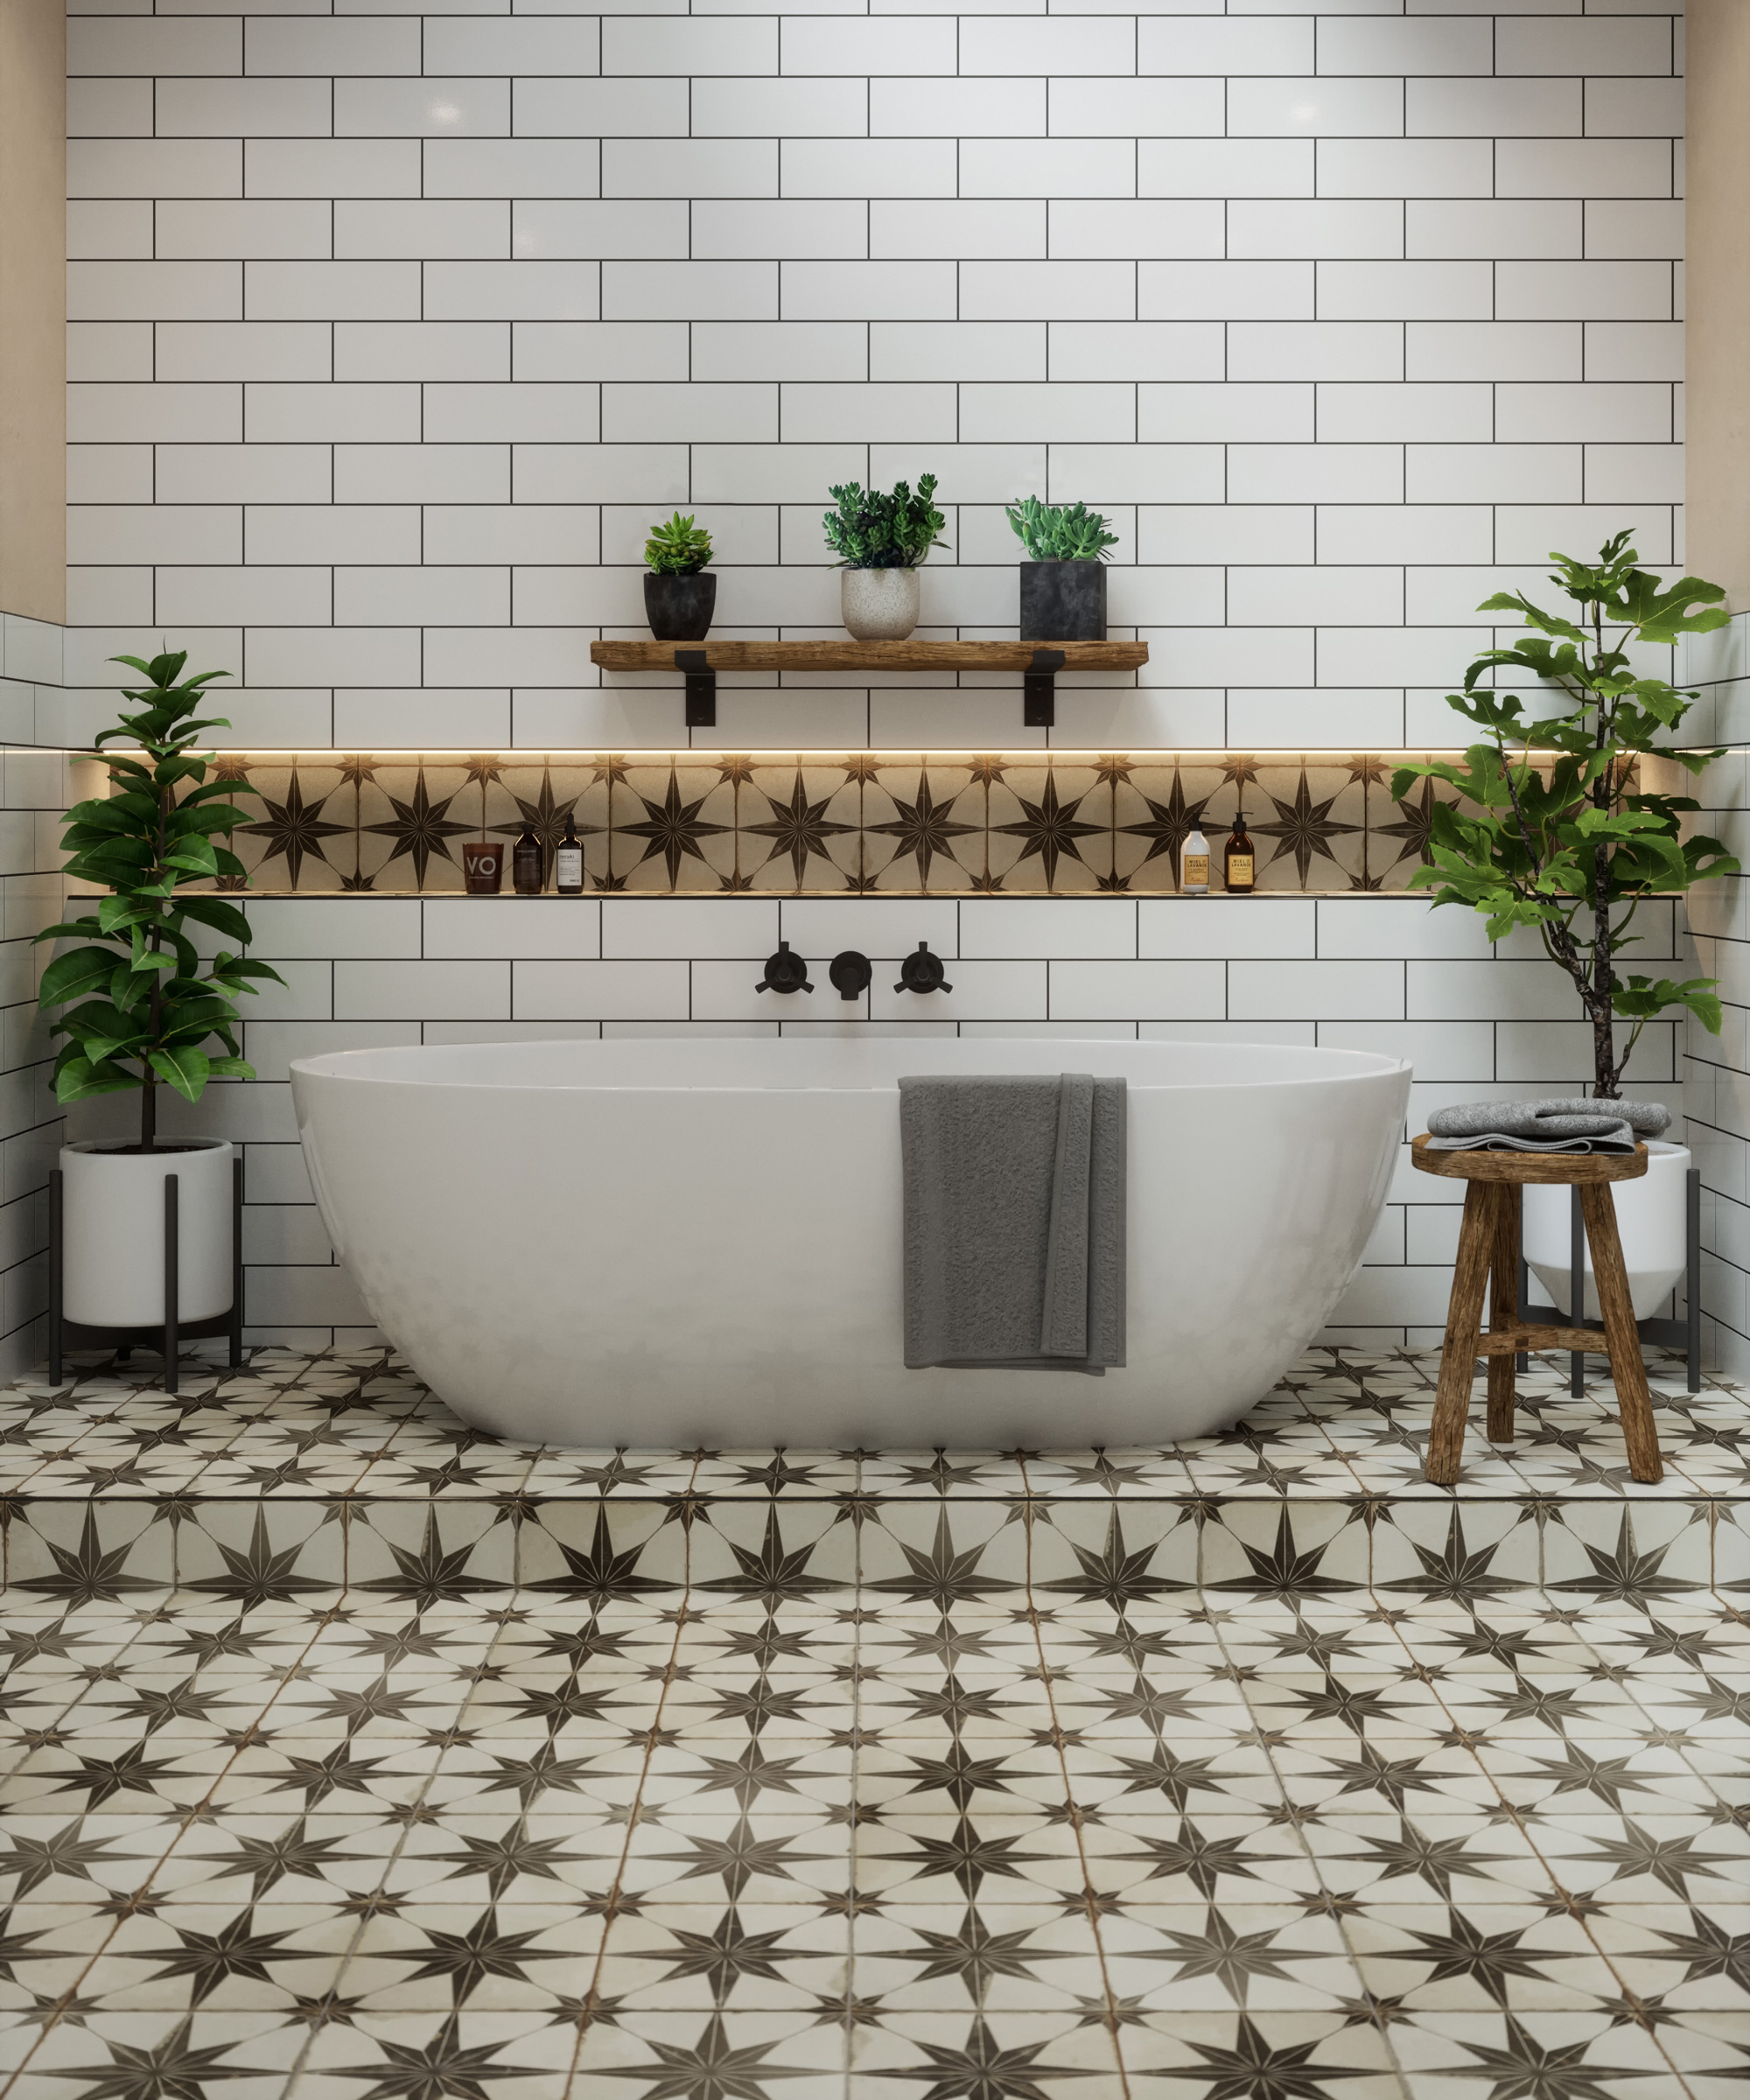 Bathroom Tile Ideas 32 New Looks To, Cost To Tile Bathroom Floor And Shower